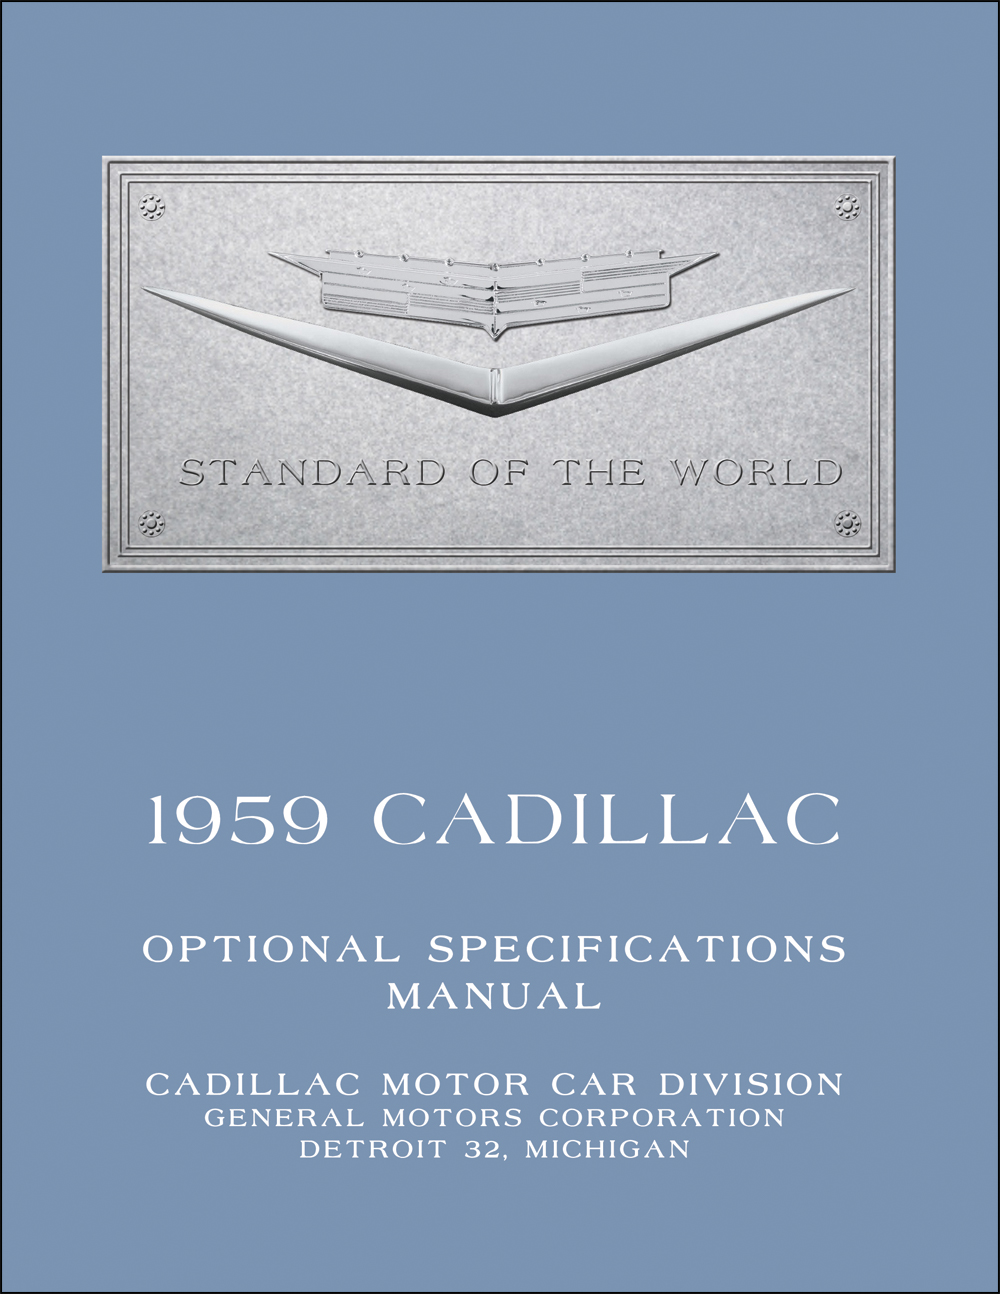 1959 Cadillac Optional Specifications Manual Reprint